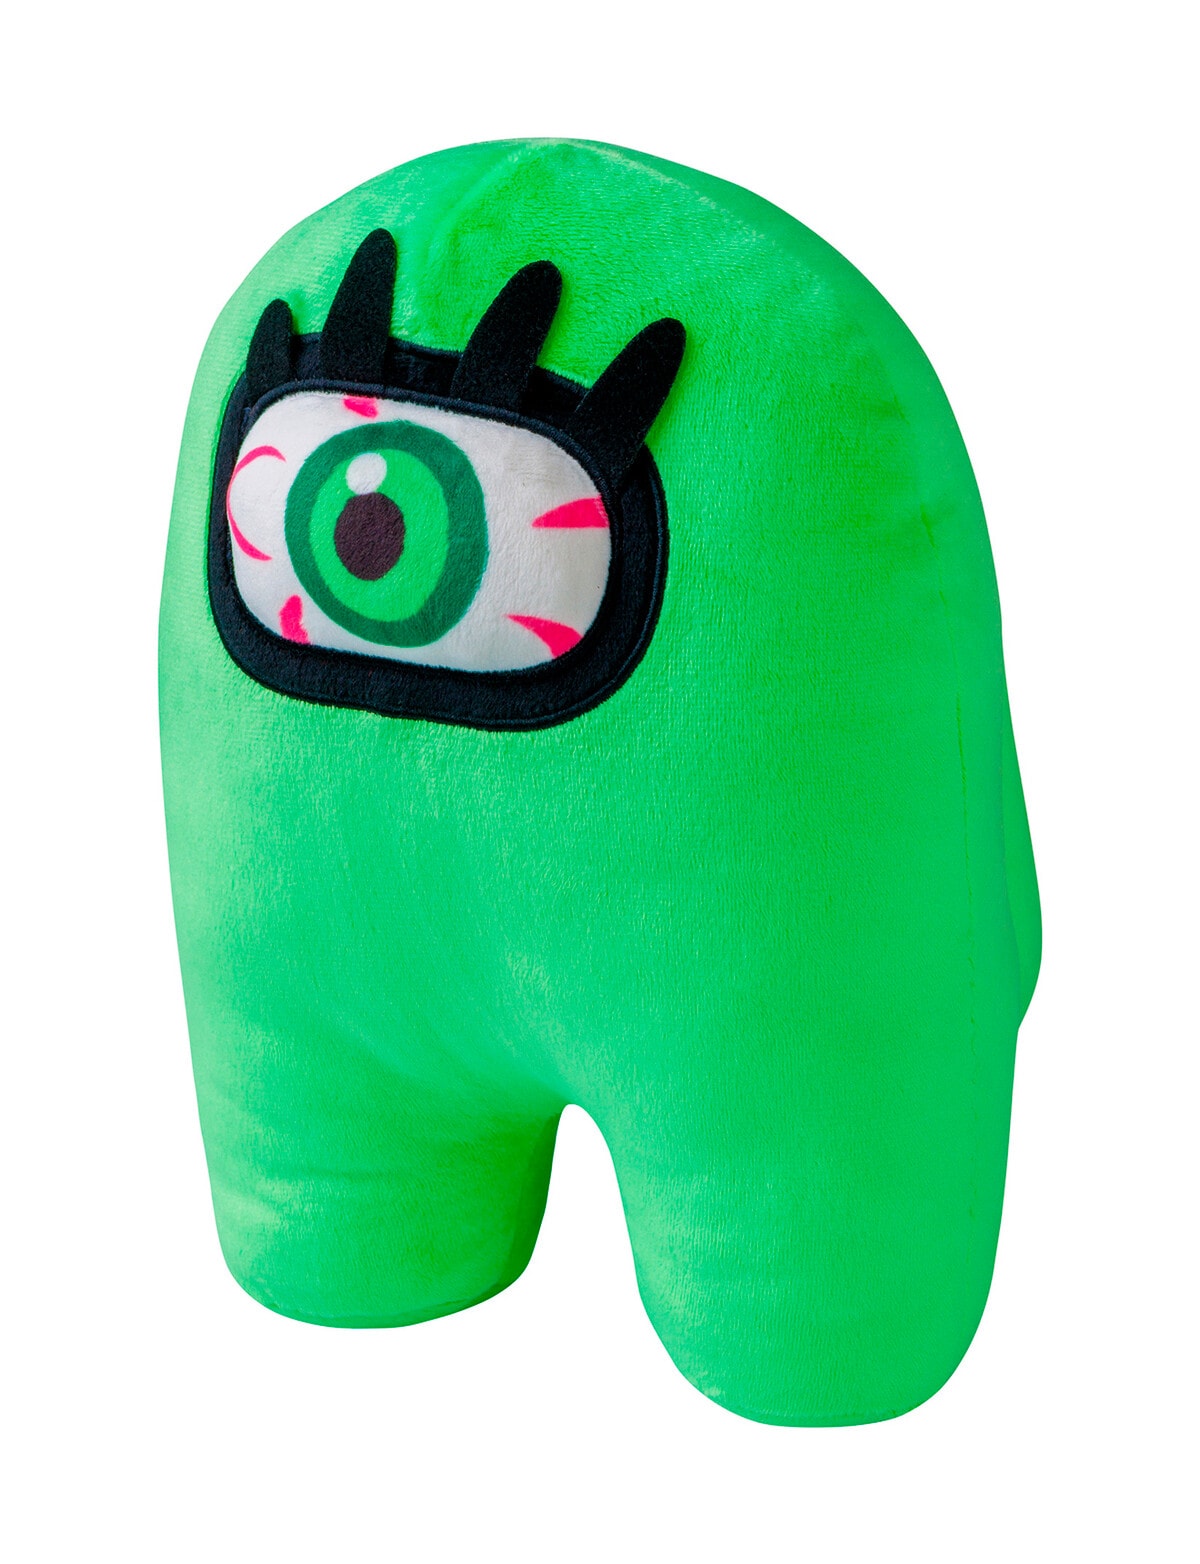 P I SOFT TOYS 15cm green among us soft toy for kids - 15 cm - 15cm